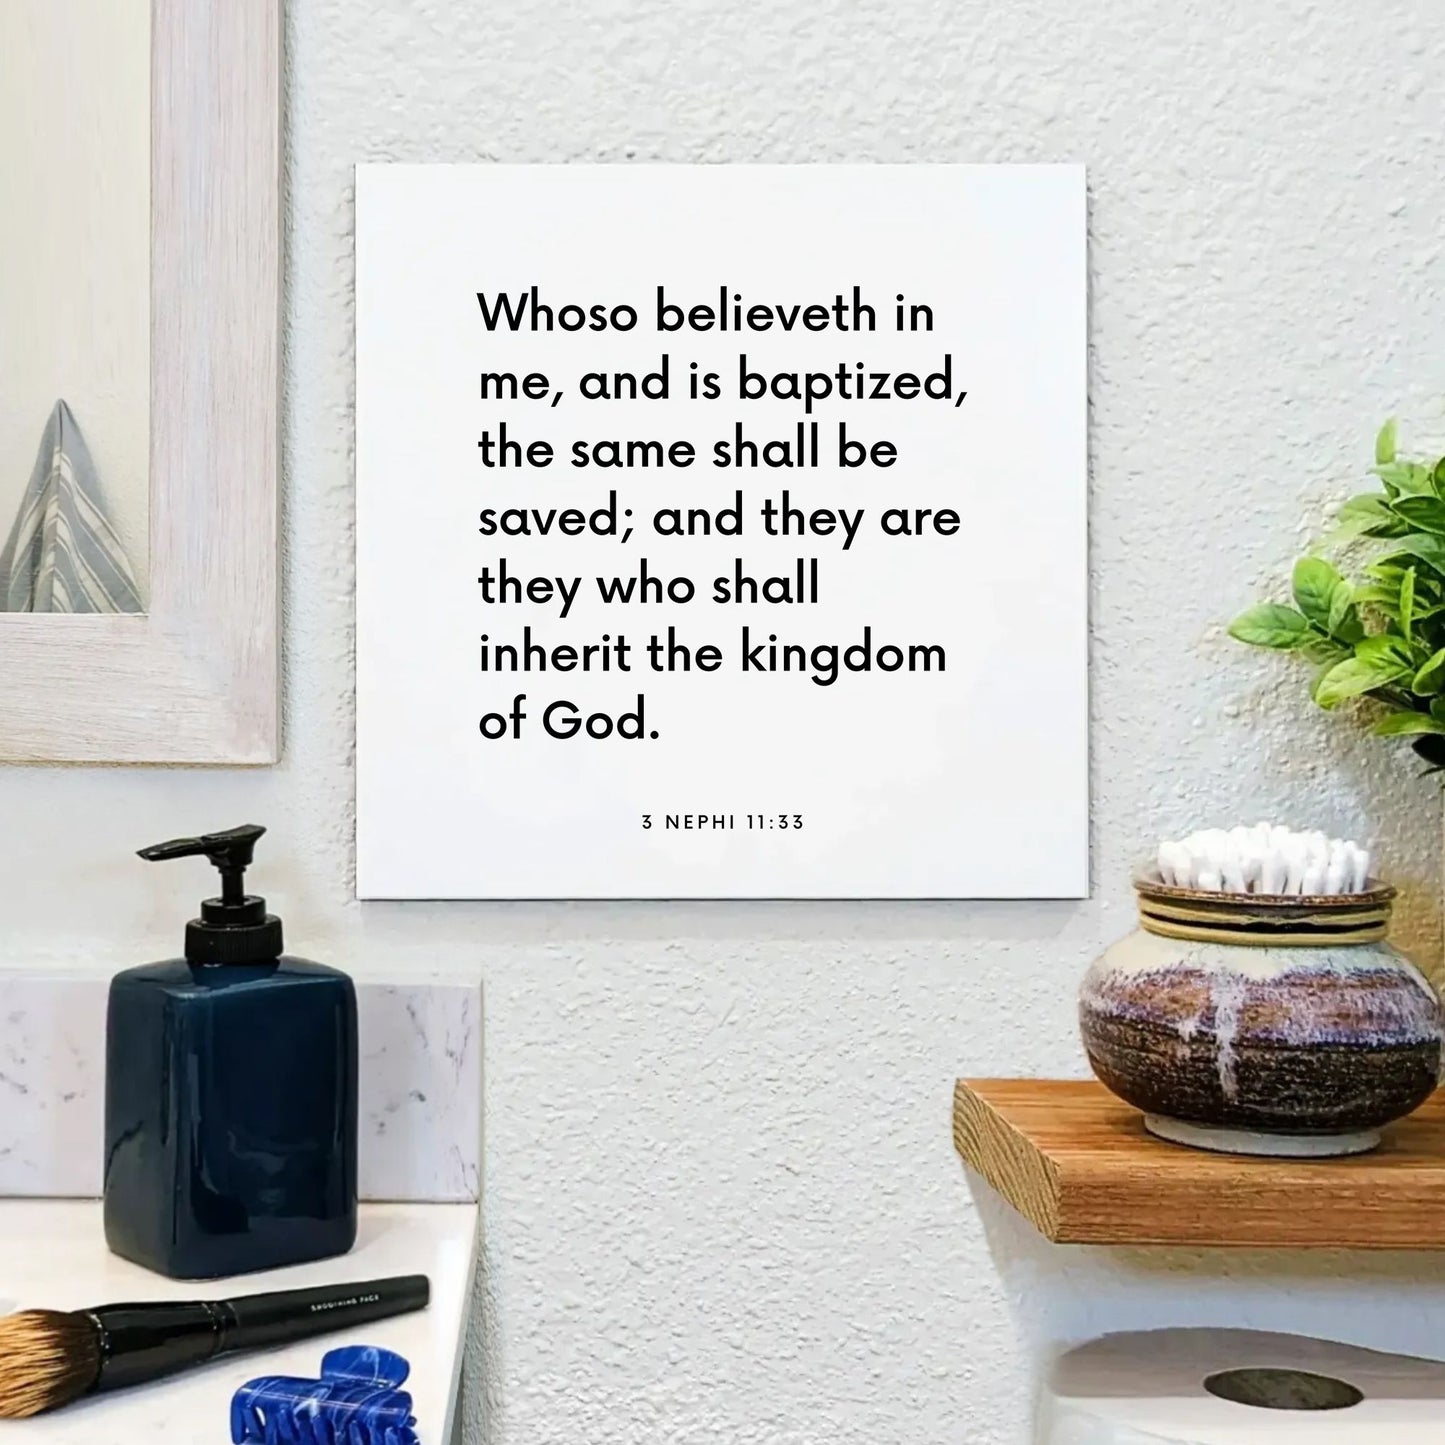 Bathroom mouting of the scripture tile for 3 Nephi 11:33 - "Whoso believeth in me, and is baptized, shall be saved"